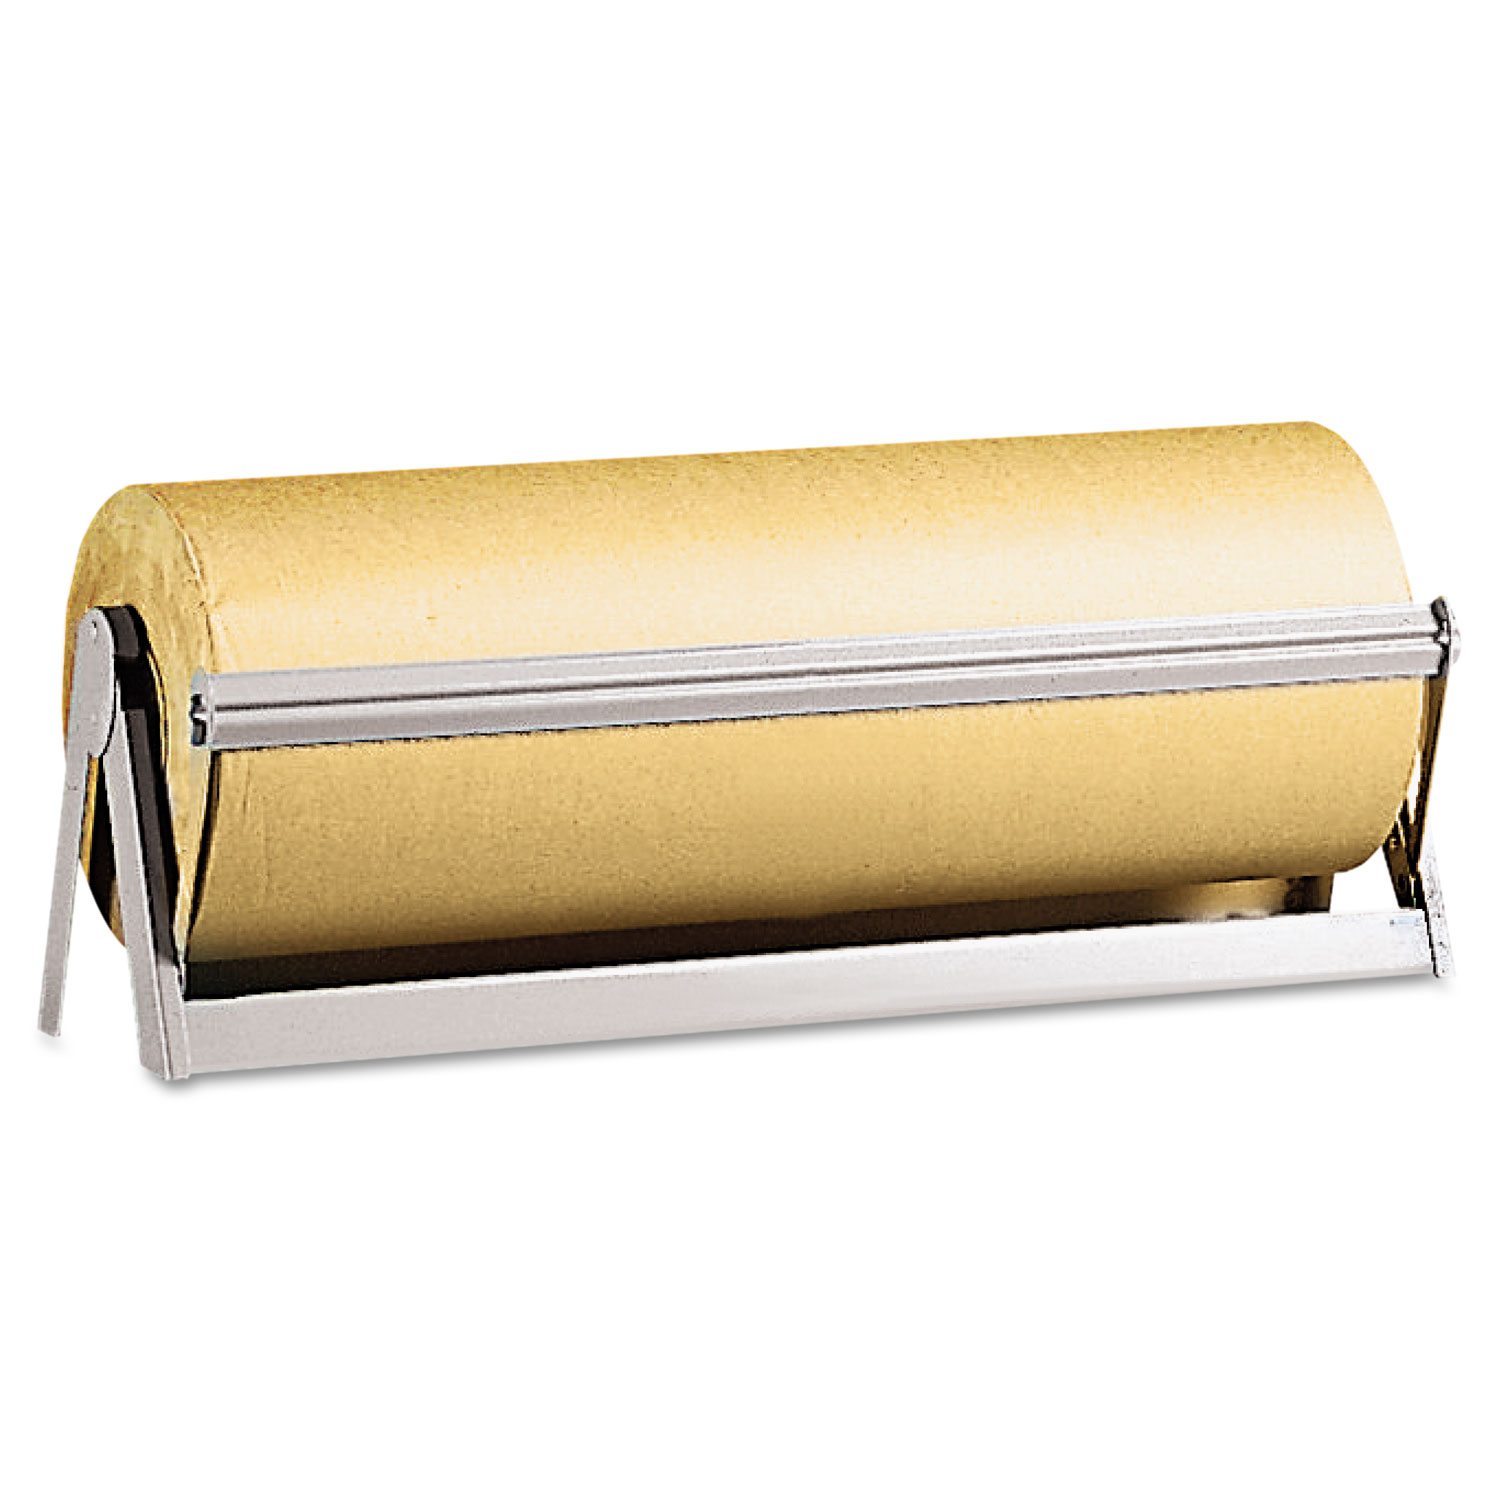 Paper Roll Cutter for Rolls Up to 9